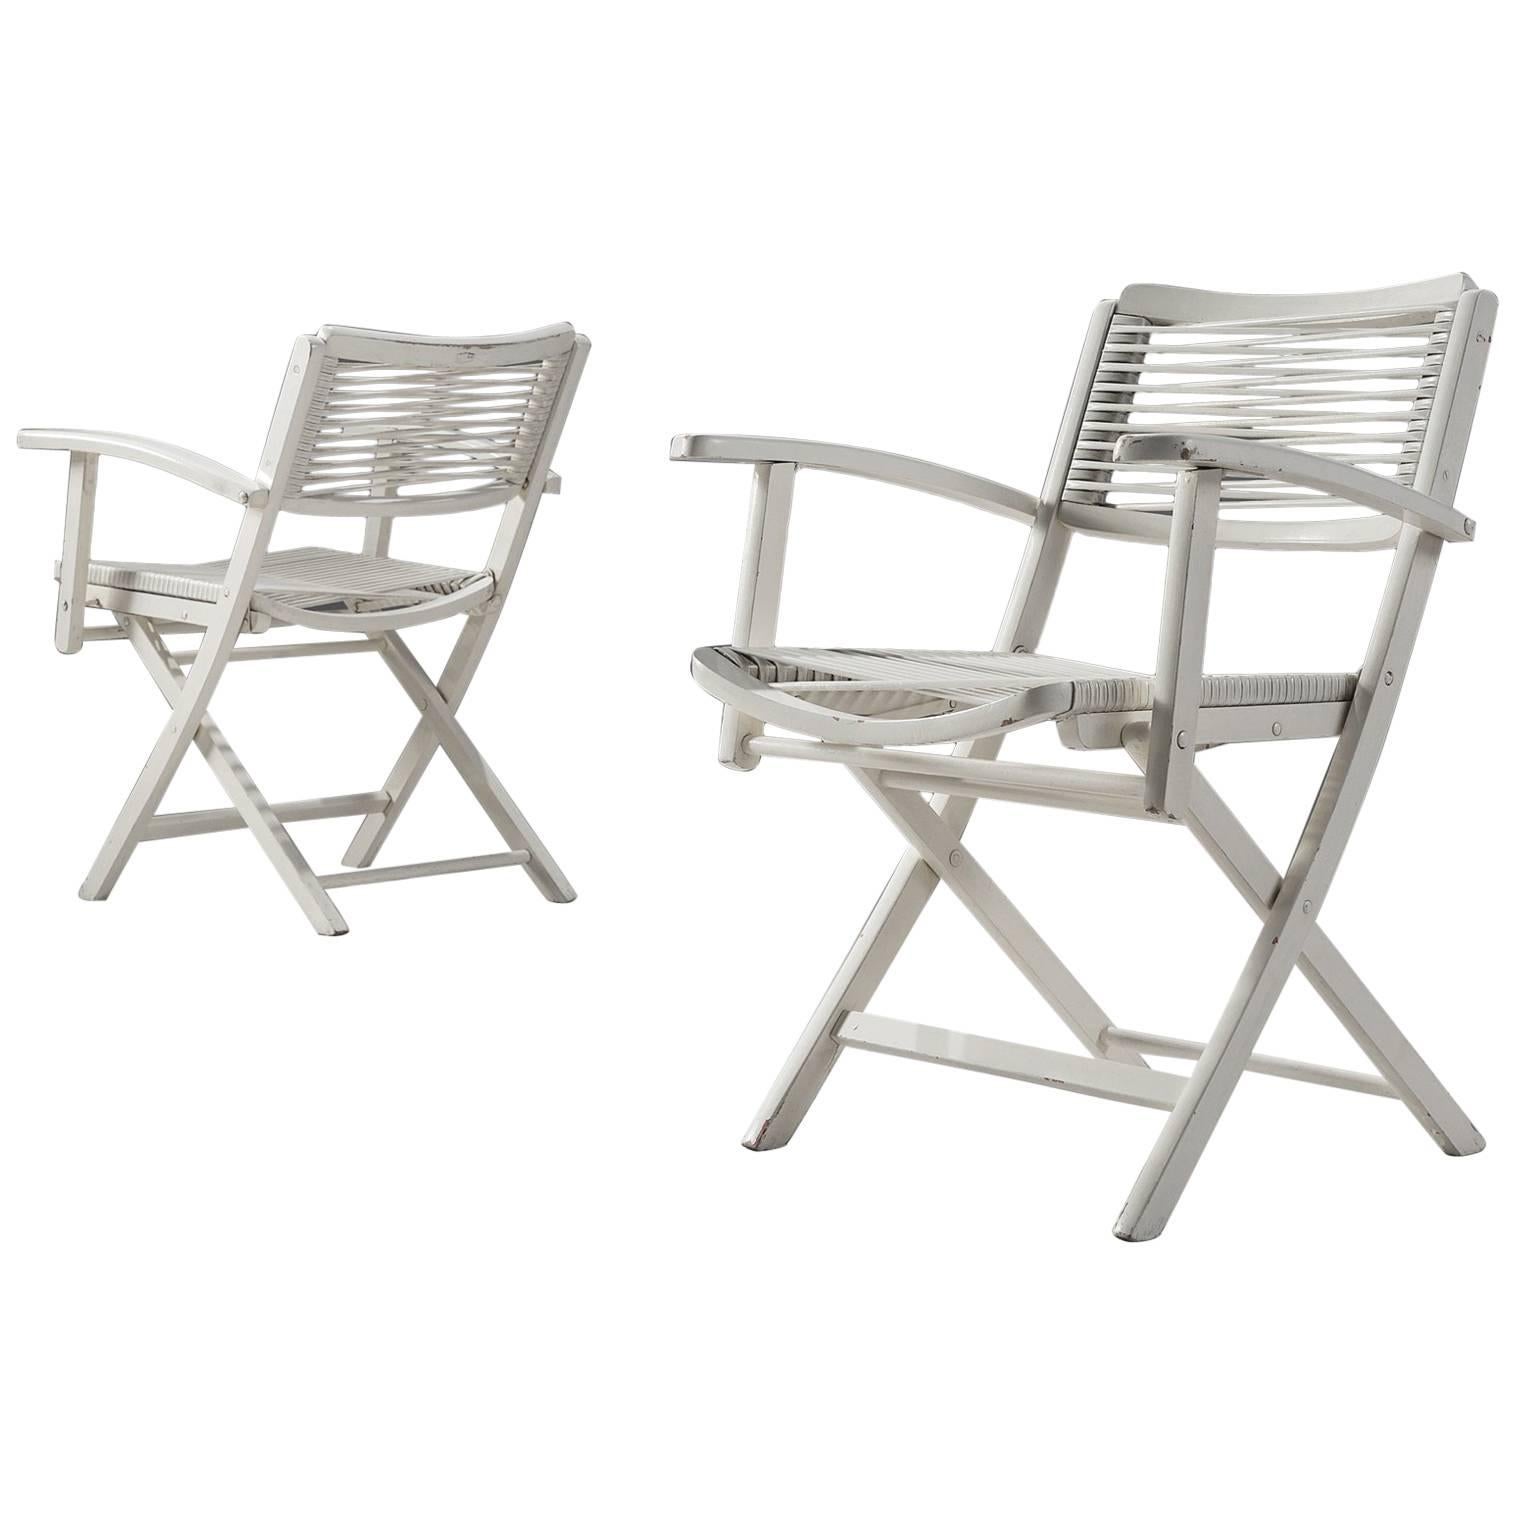 Pair of White Folding Chairs